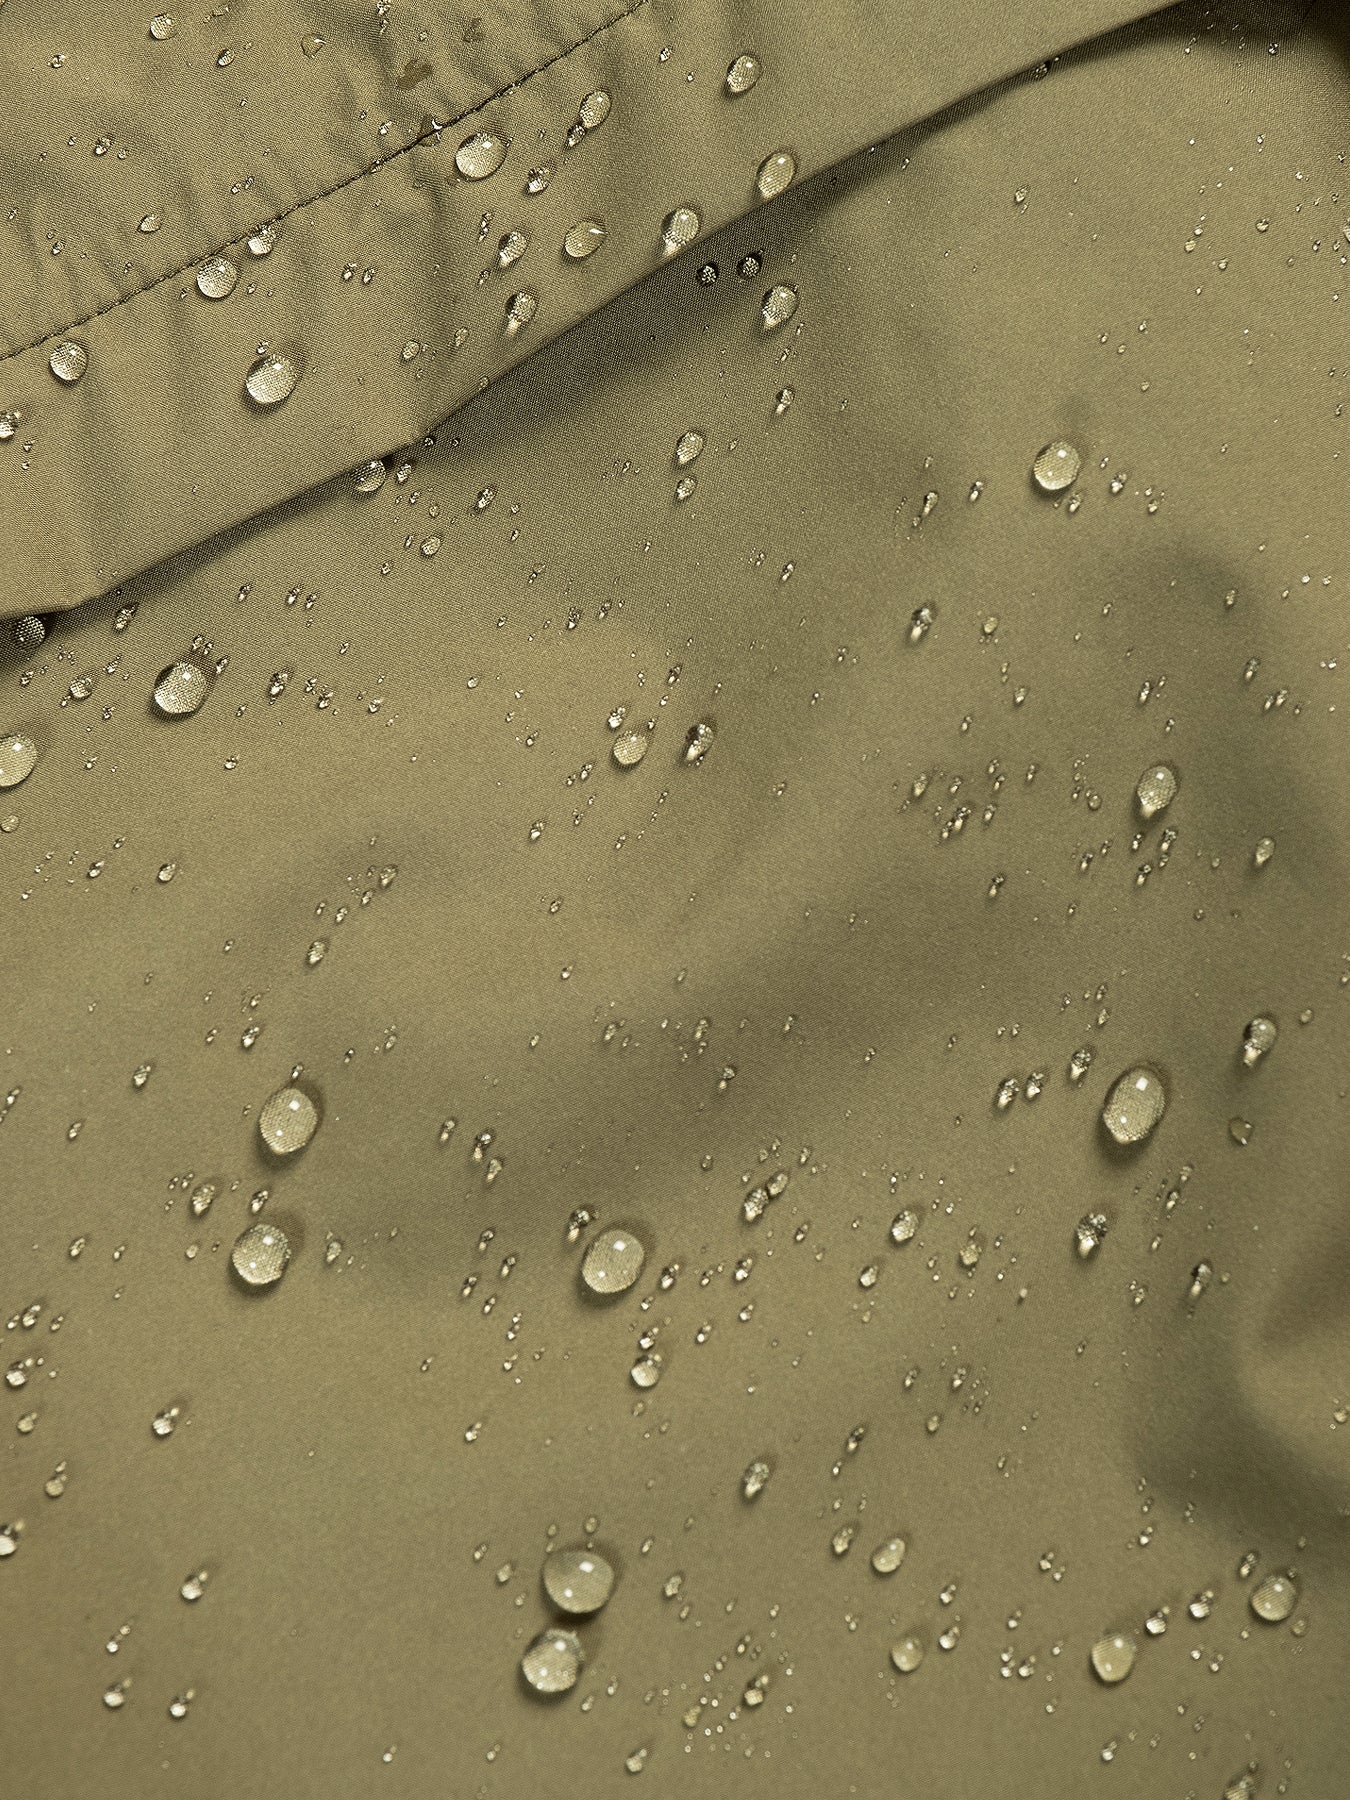 Convertible Hiking Pant in Olive